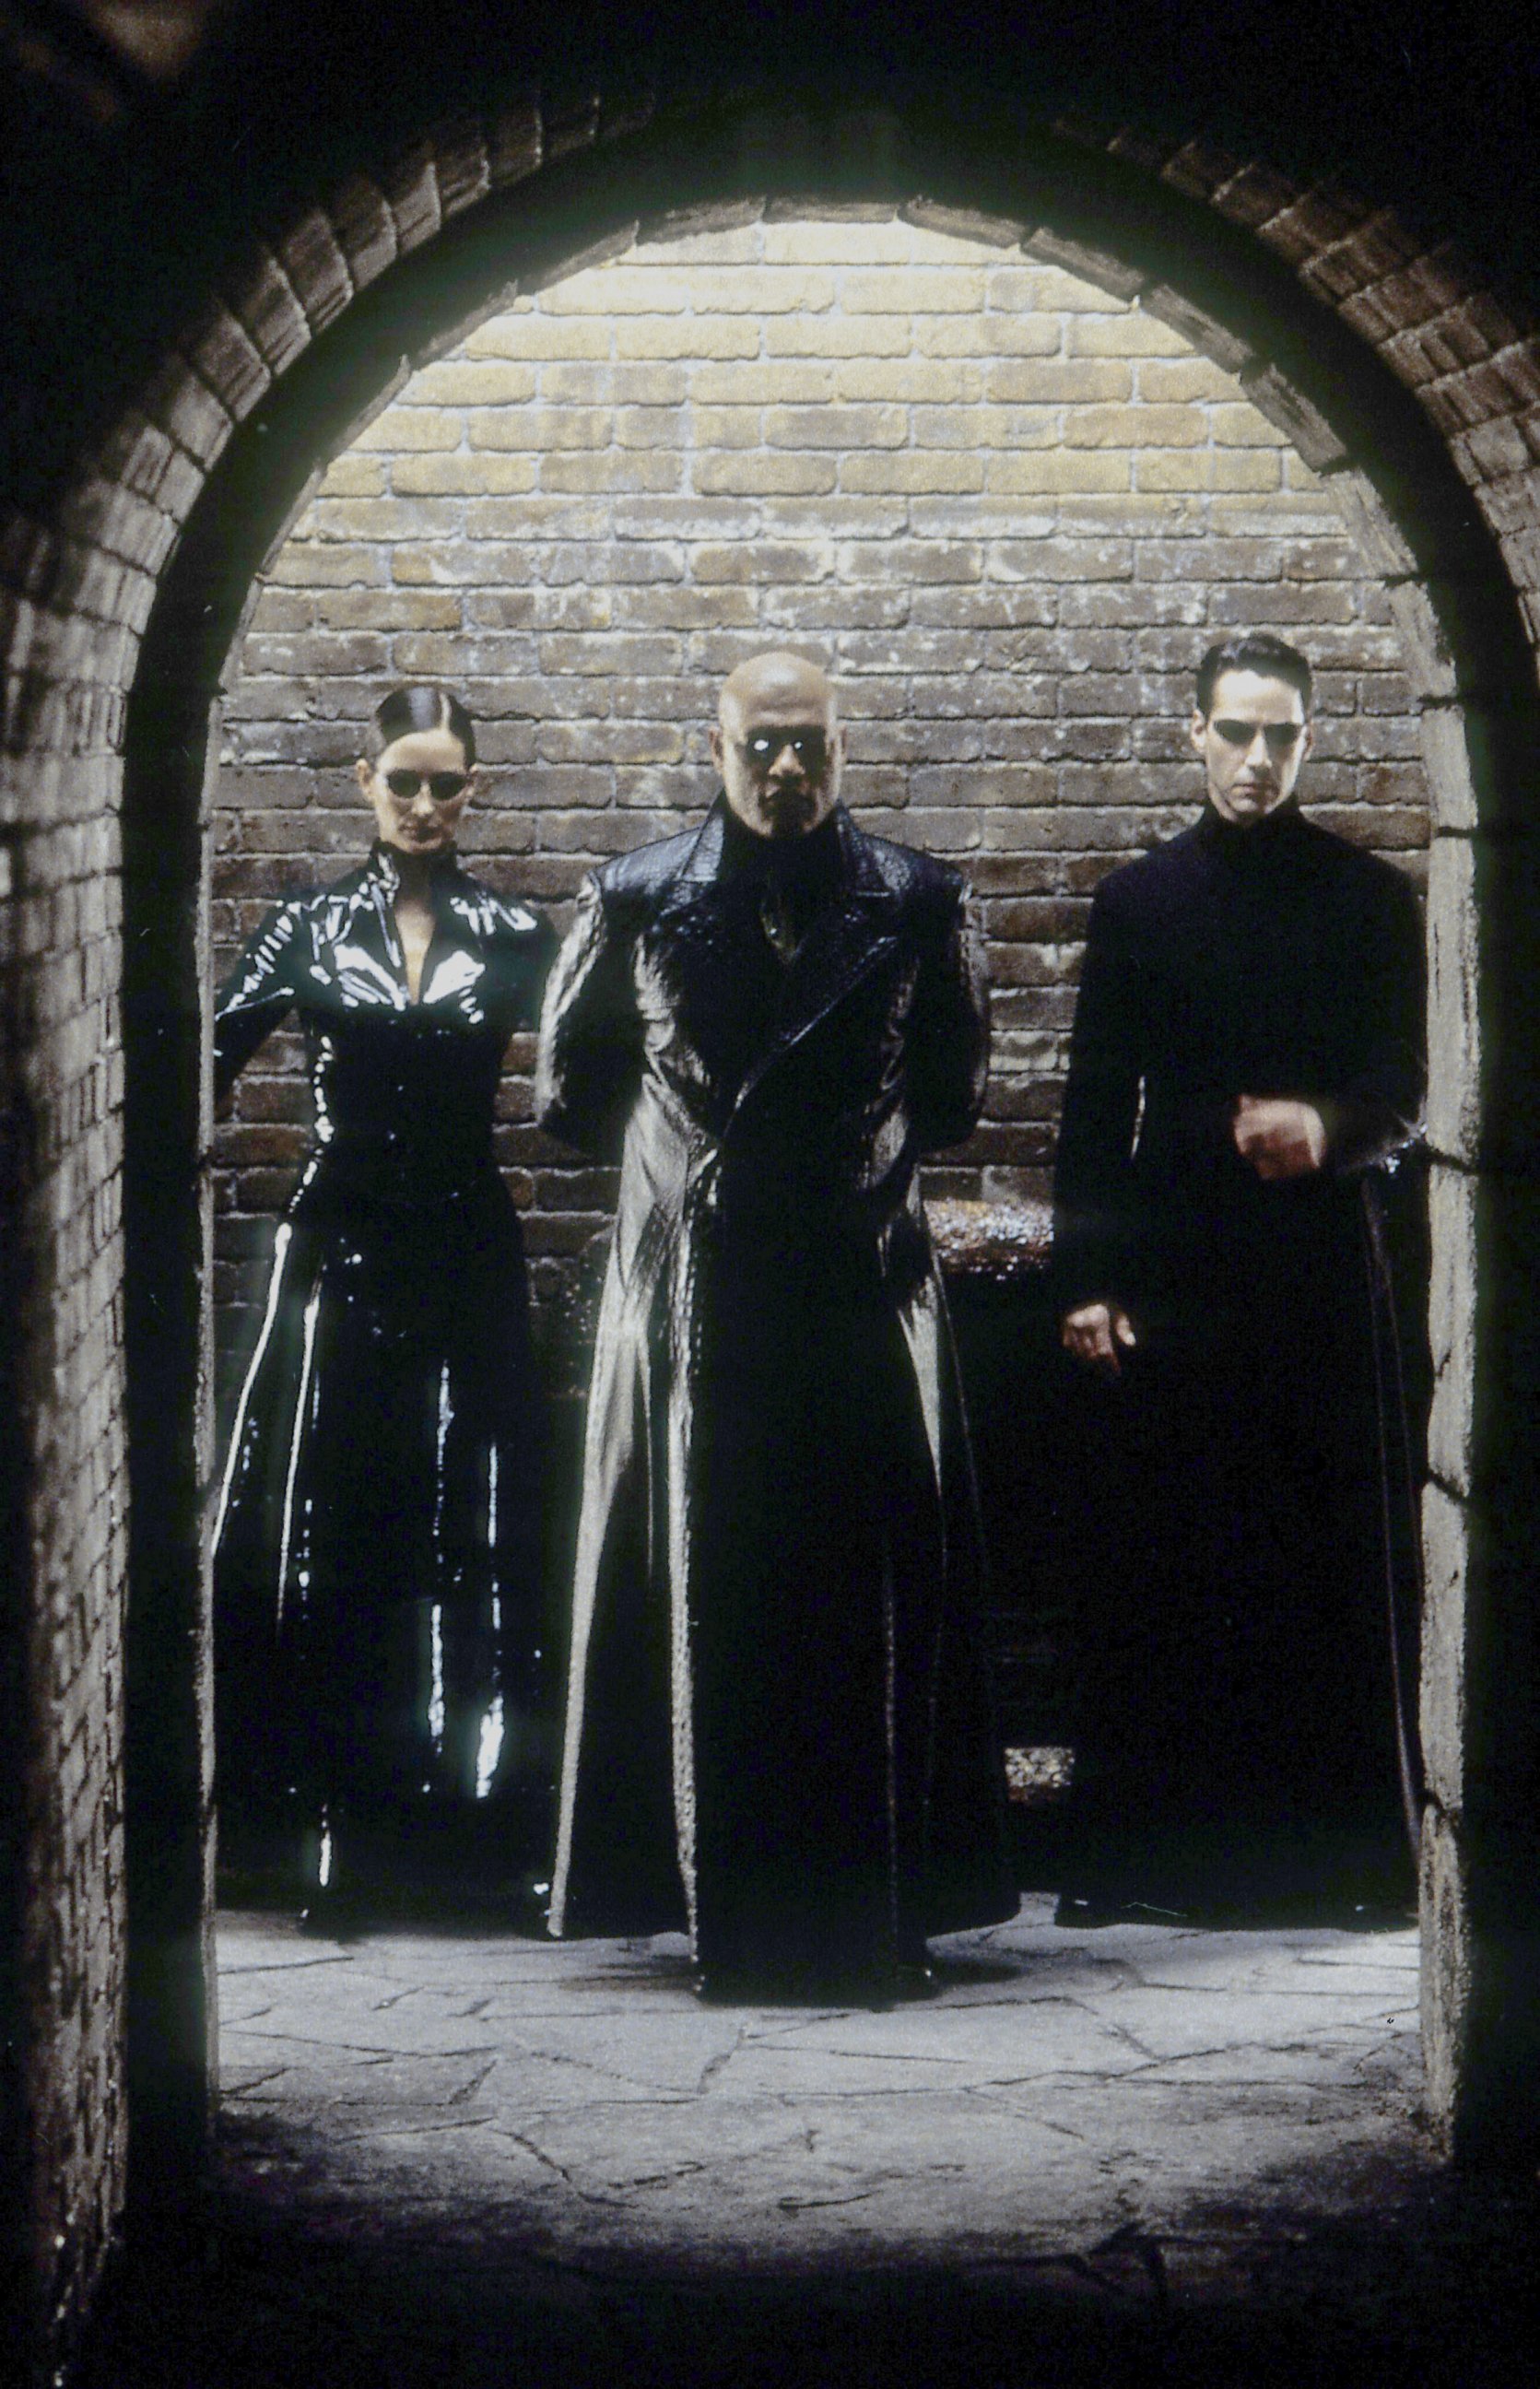 PHOTO: Carrie-Anne, Moss Laurence Fishburne, and Keanu Reeves in a scene from the film "The Matrix Reloaded."